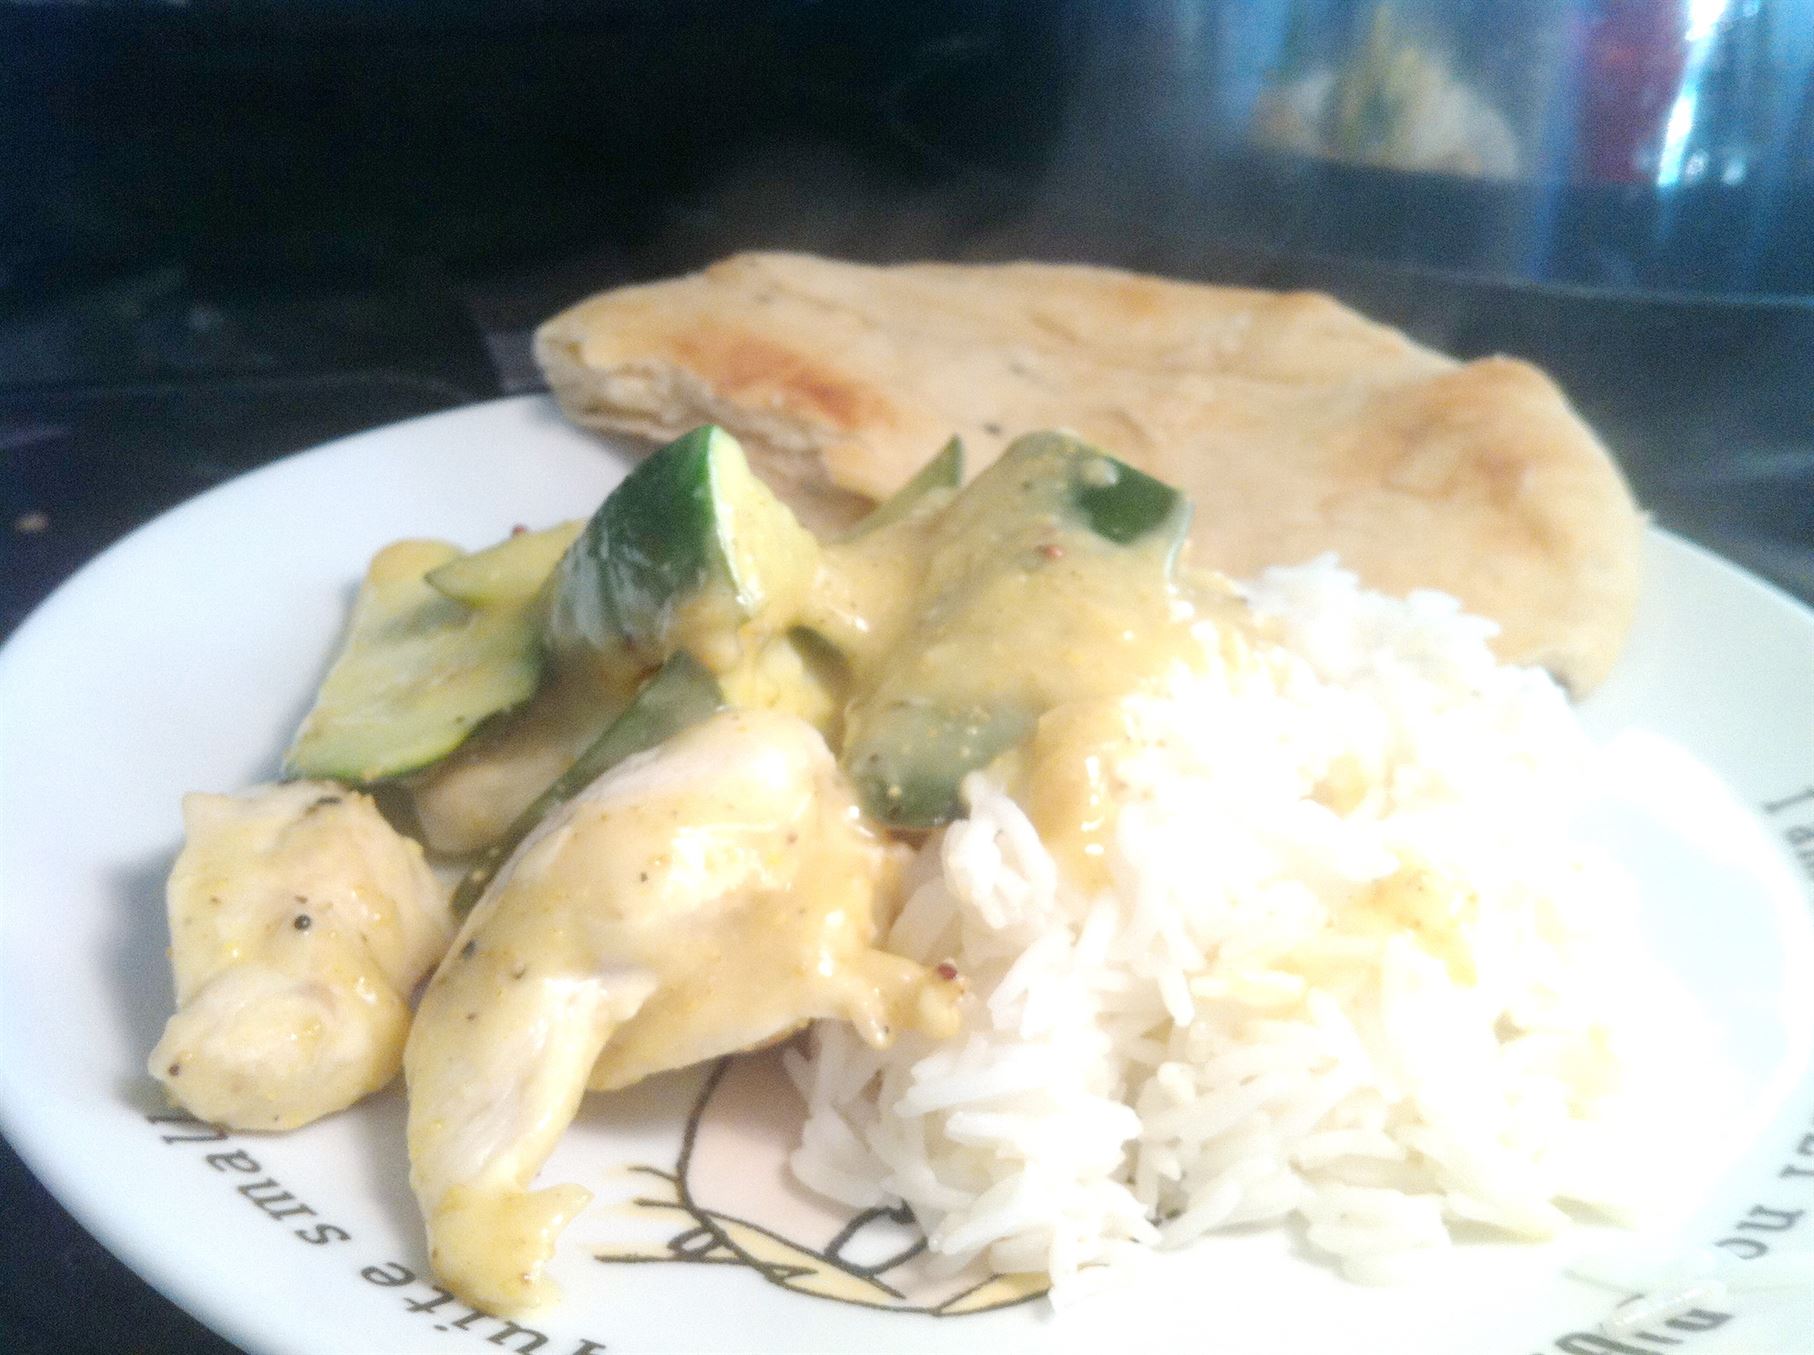 Bengali Creamy Coconut Chicken with Courgettes, Lay The Table